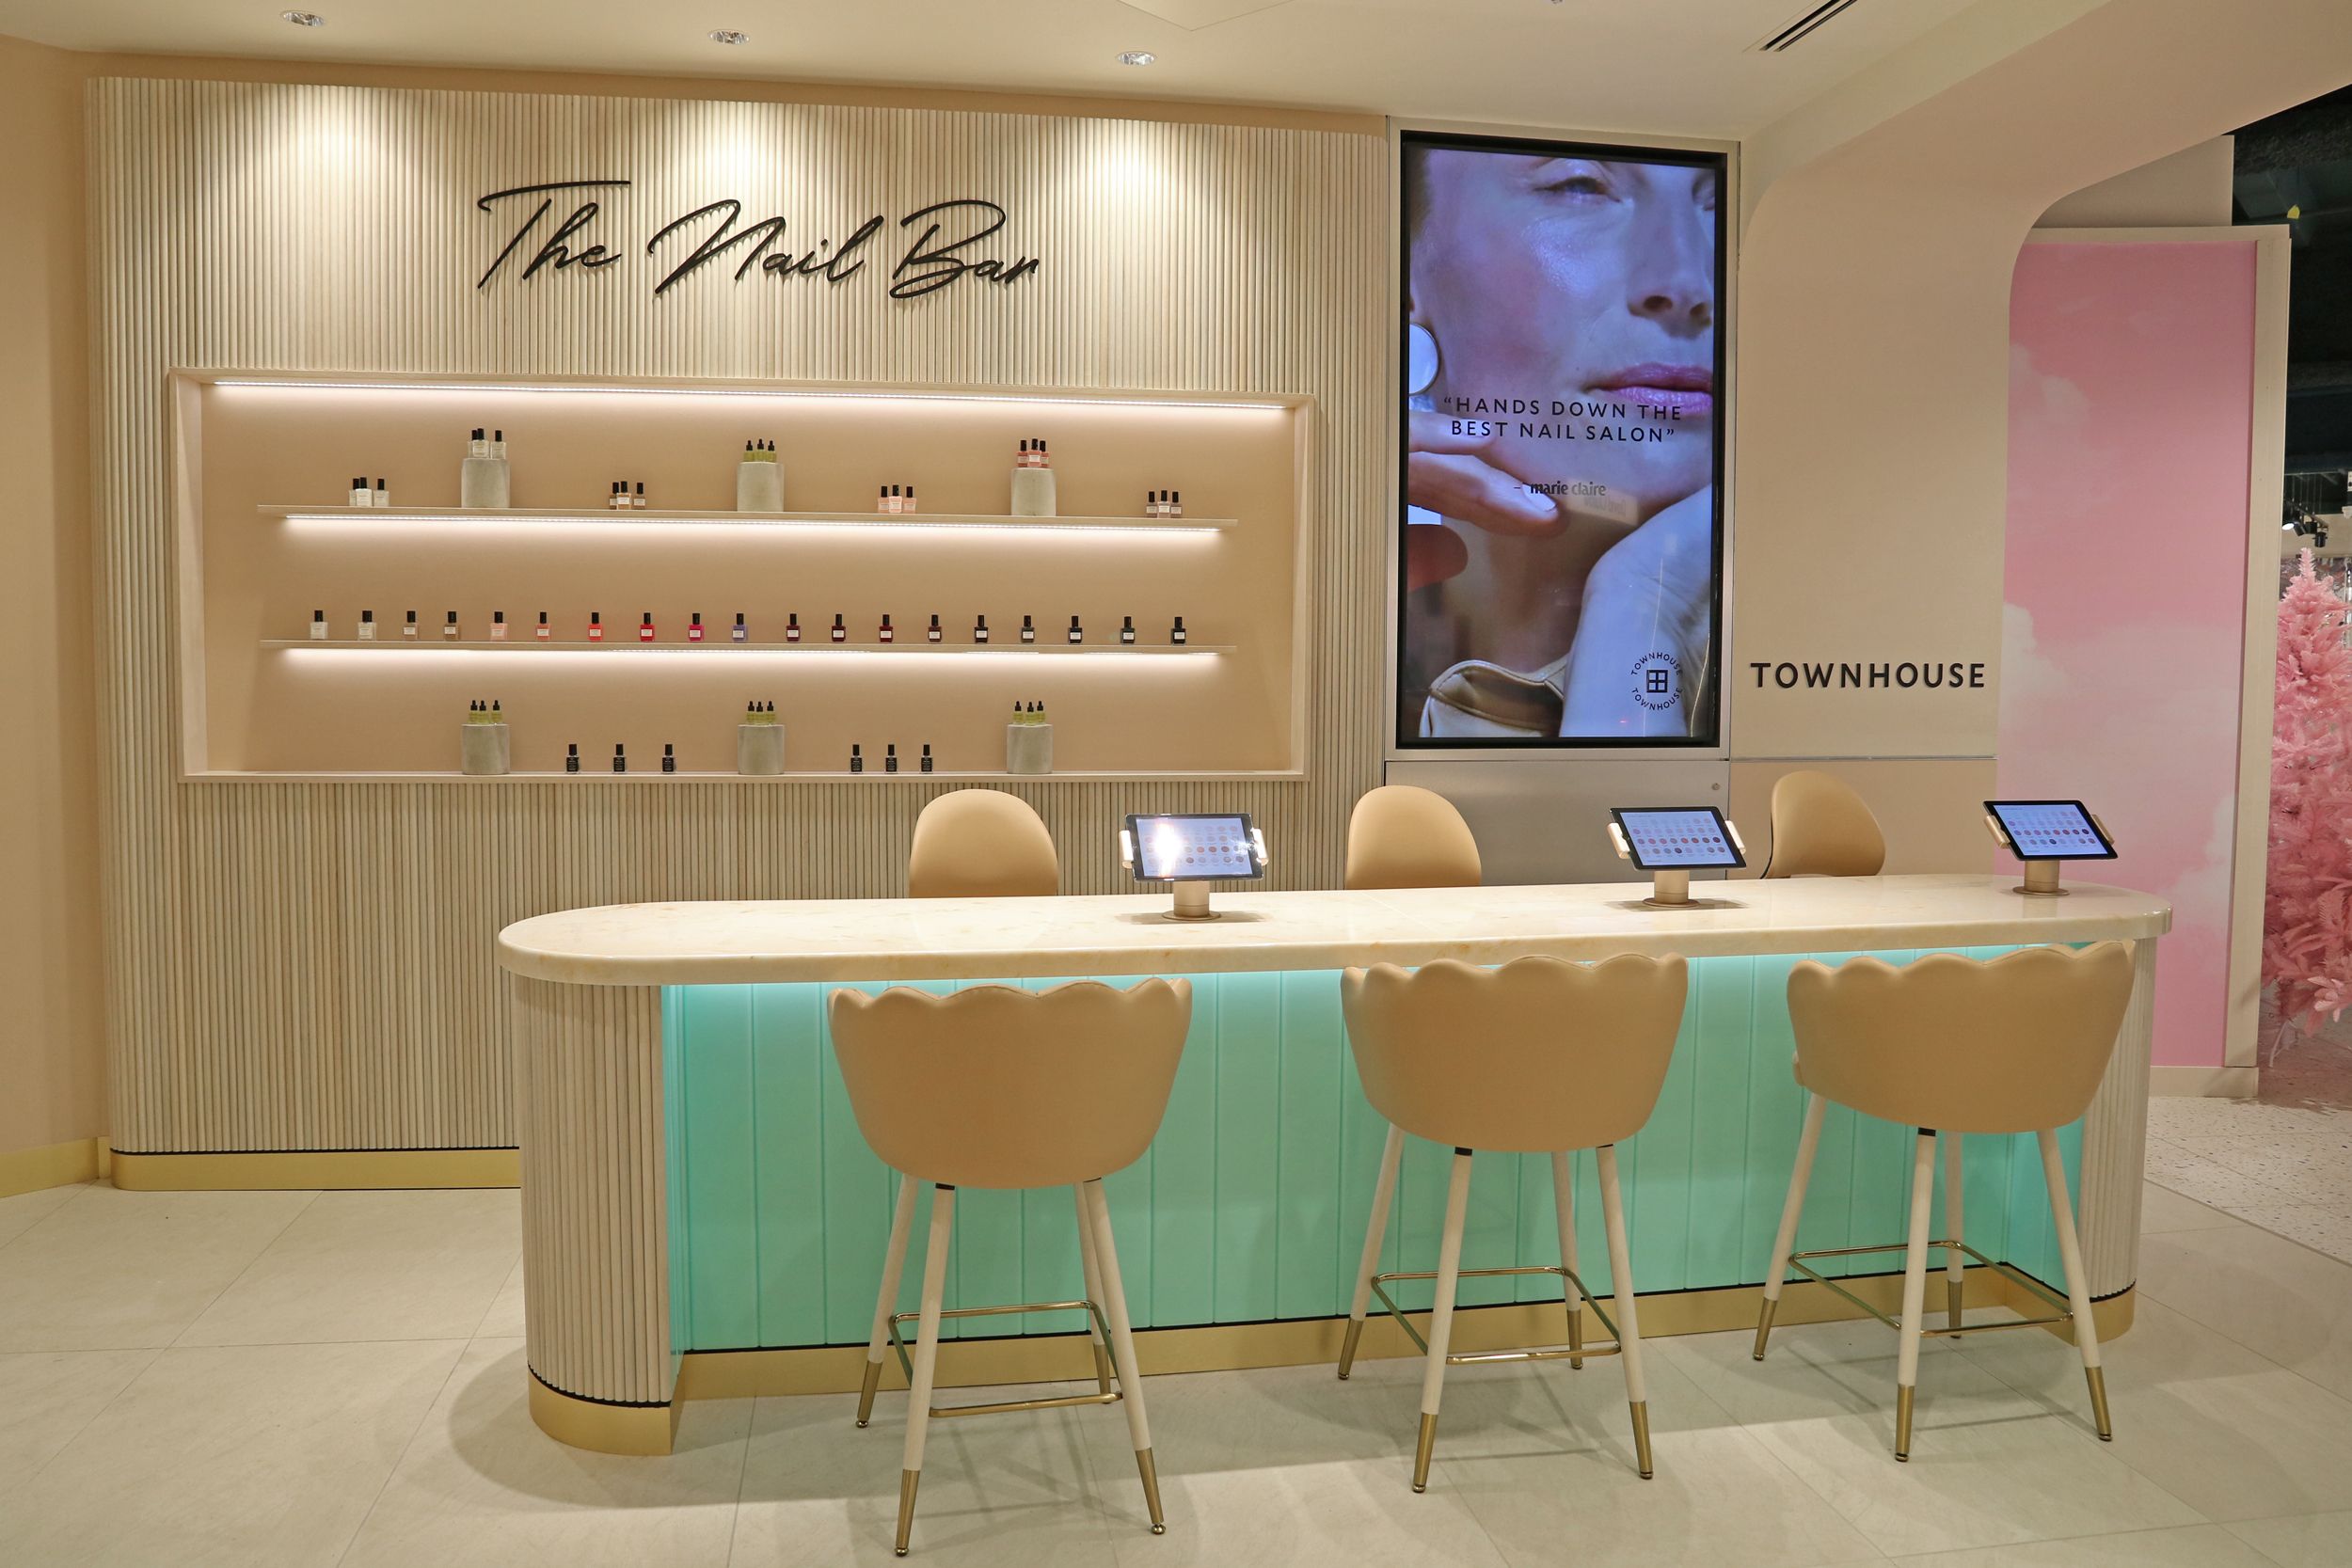 The Best UK Nail Salons And Nail Bars For Getting A Next Level Manicure